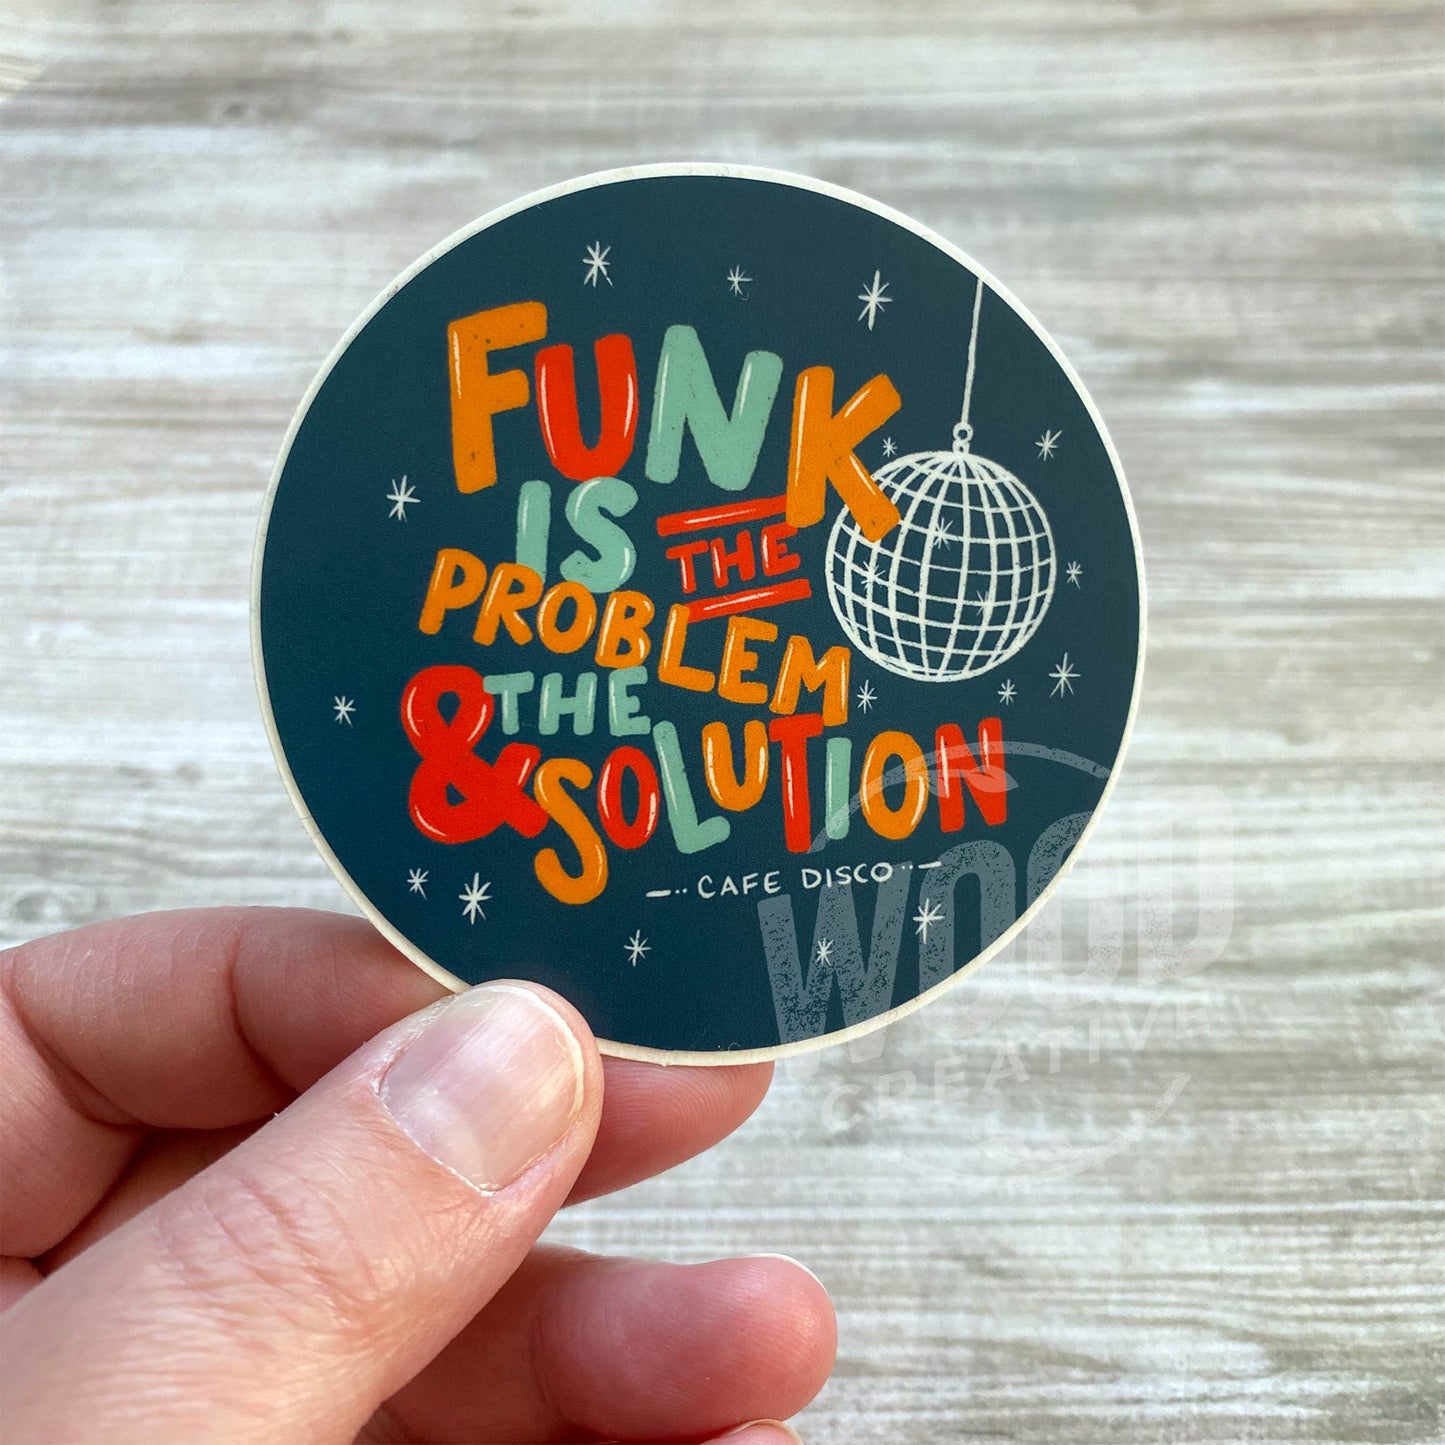 Funk Is The Problem & The Solution High Quality Vinyl Sticker